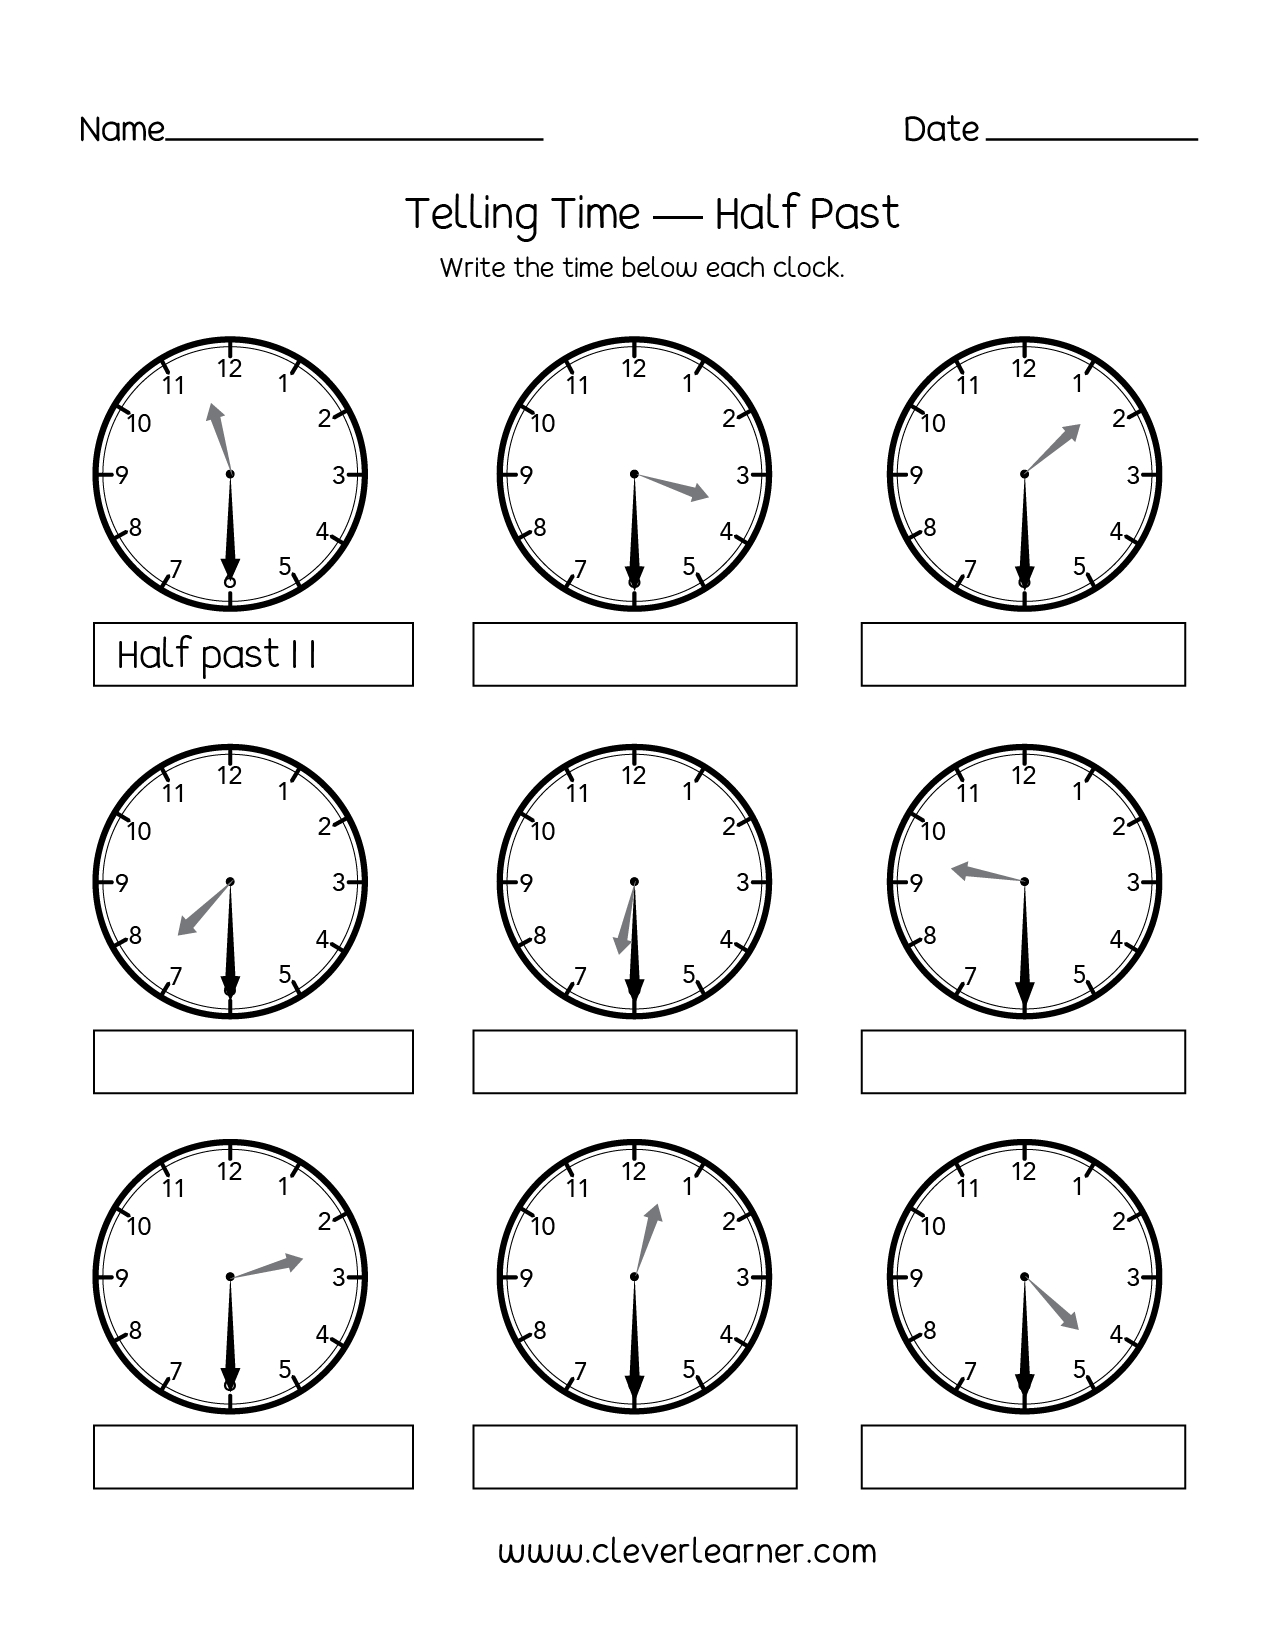 Telling Time Half Past The Hour Worksheets For 1St And 2Nd Graders | Free Printable Telling Time Worksheets For 1St Grade